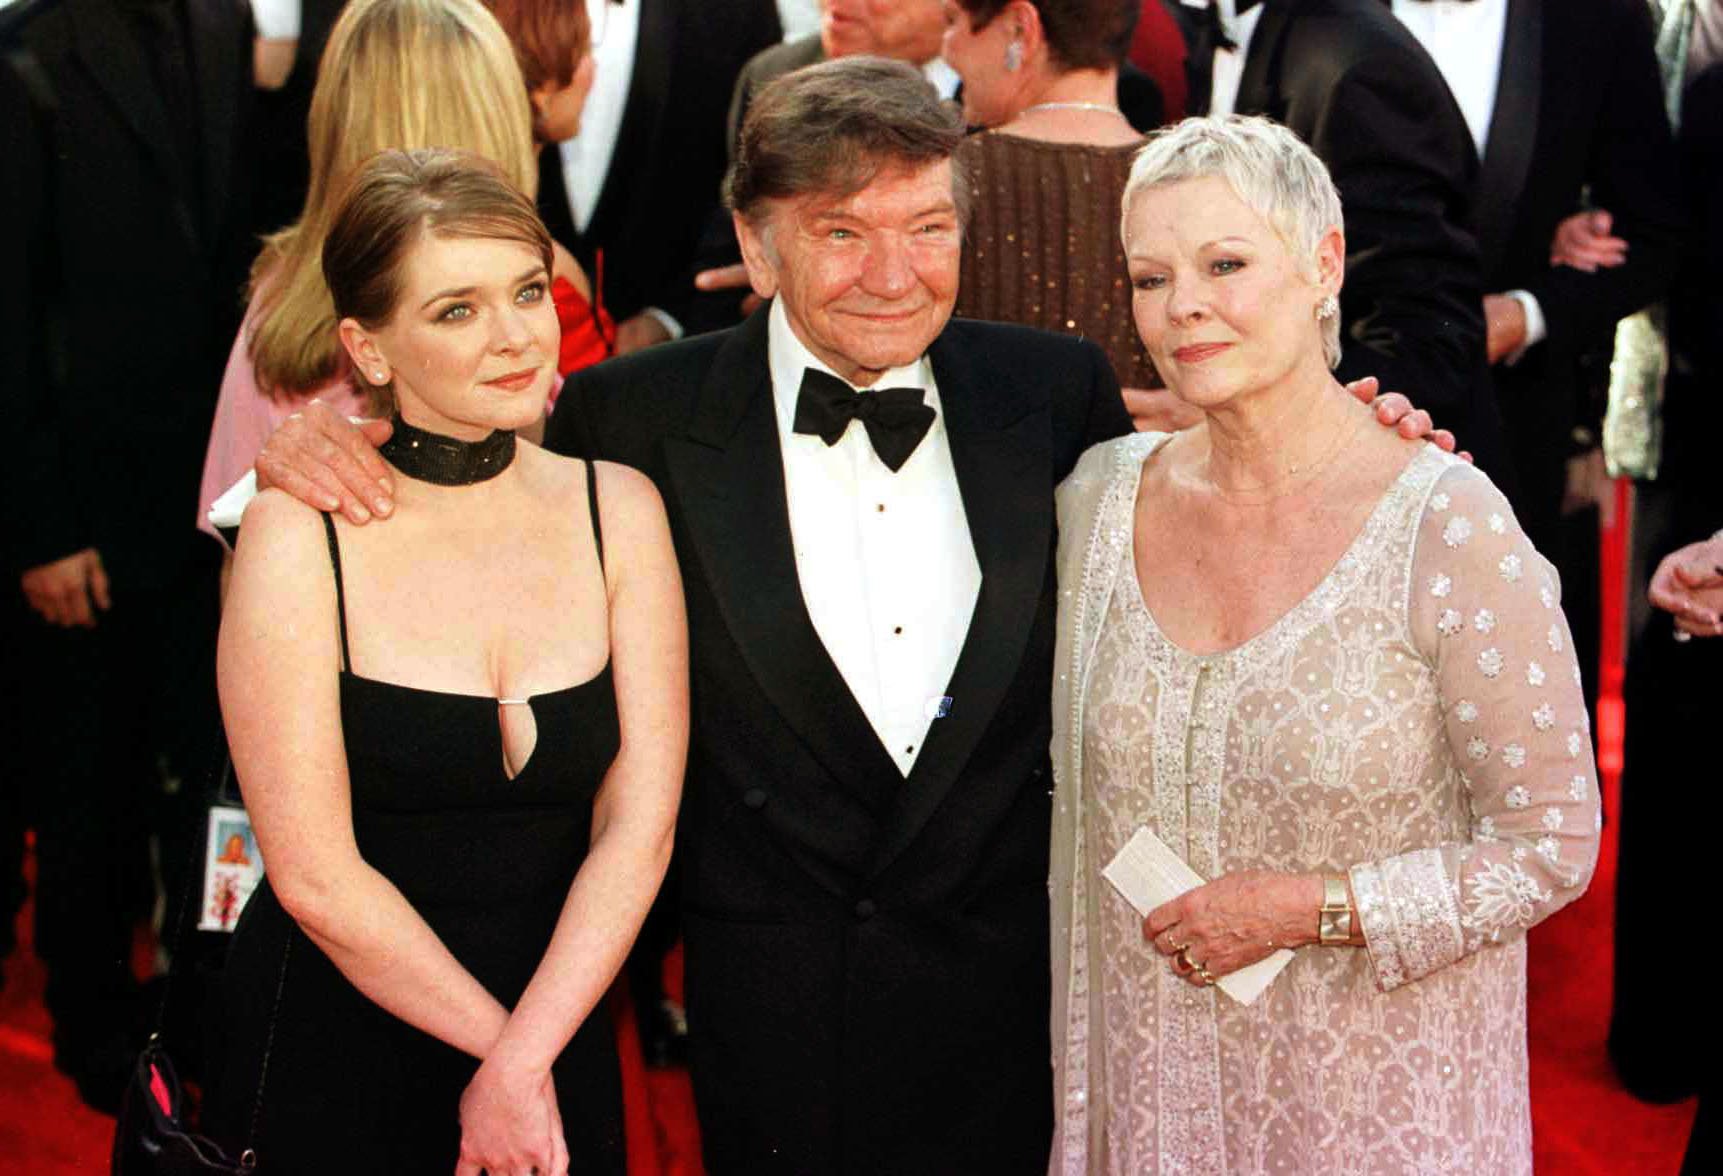 Finty Williams and her parents, Michael Williams and Judi Dench arrive for the 72nd Annual Academy Awards at the Shrine Auditorium on March 27, 2000 in Los Angeles, California ┃Source: Getty Images